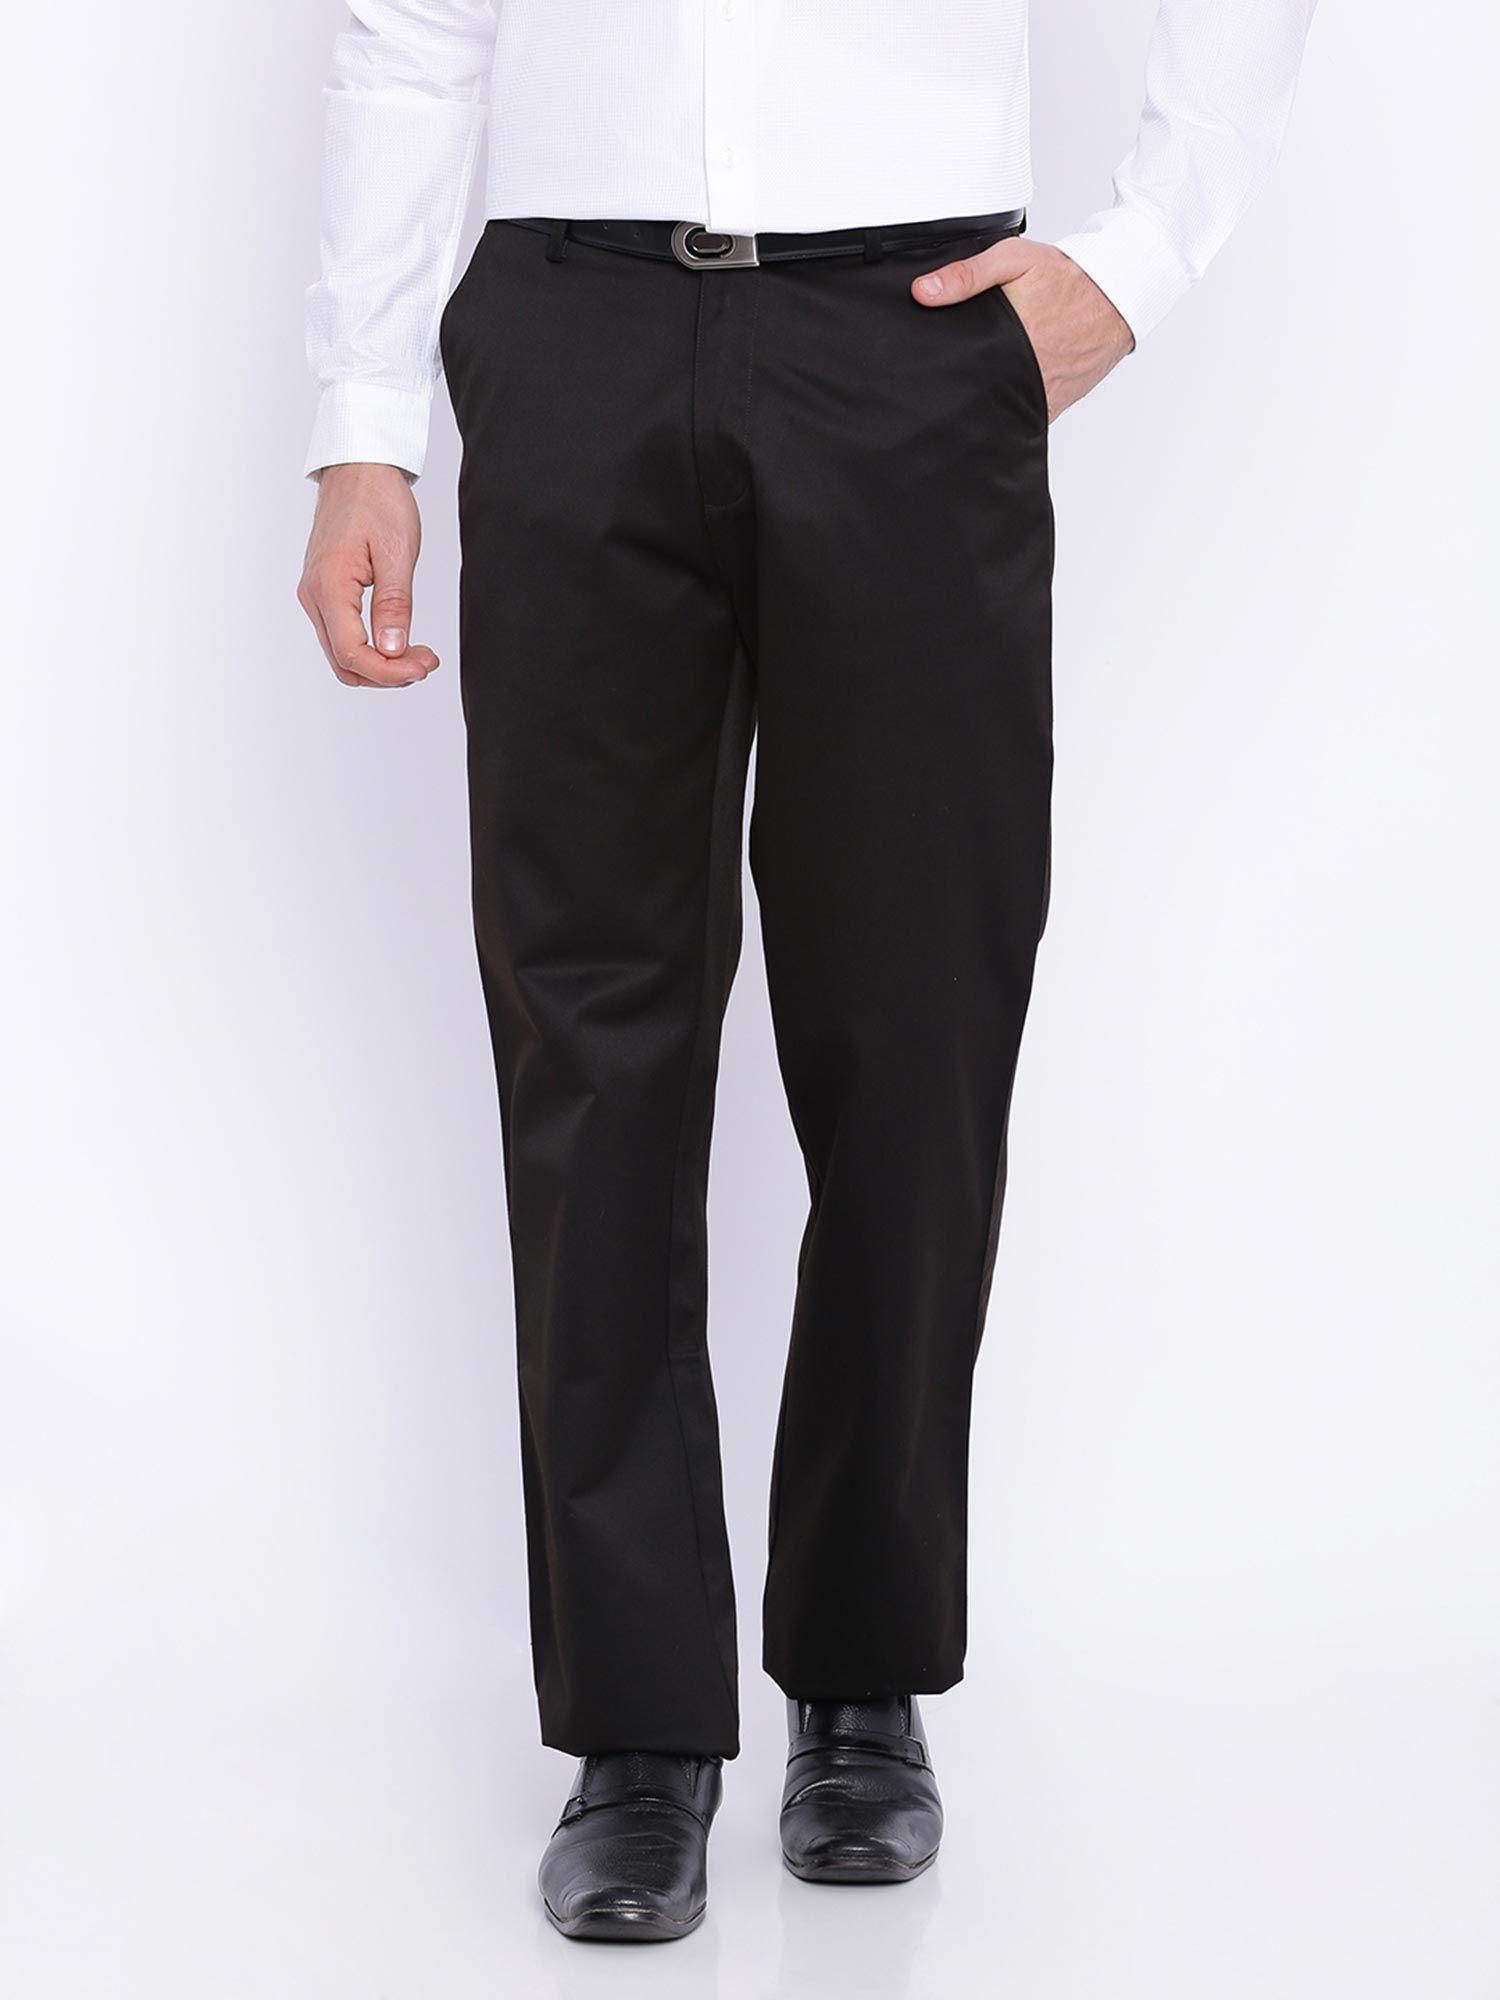 comfort-fit-steel-grey-satin-weave-poly-cotton-trousers